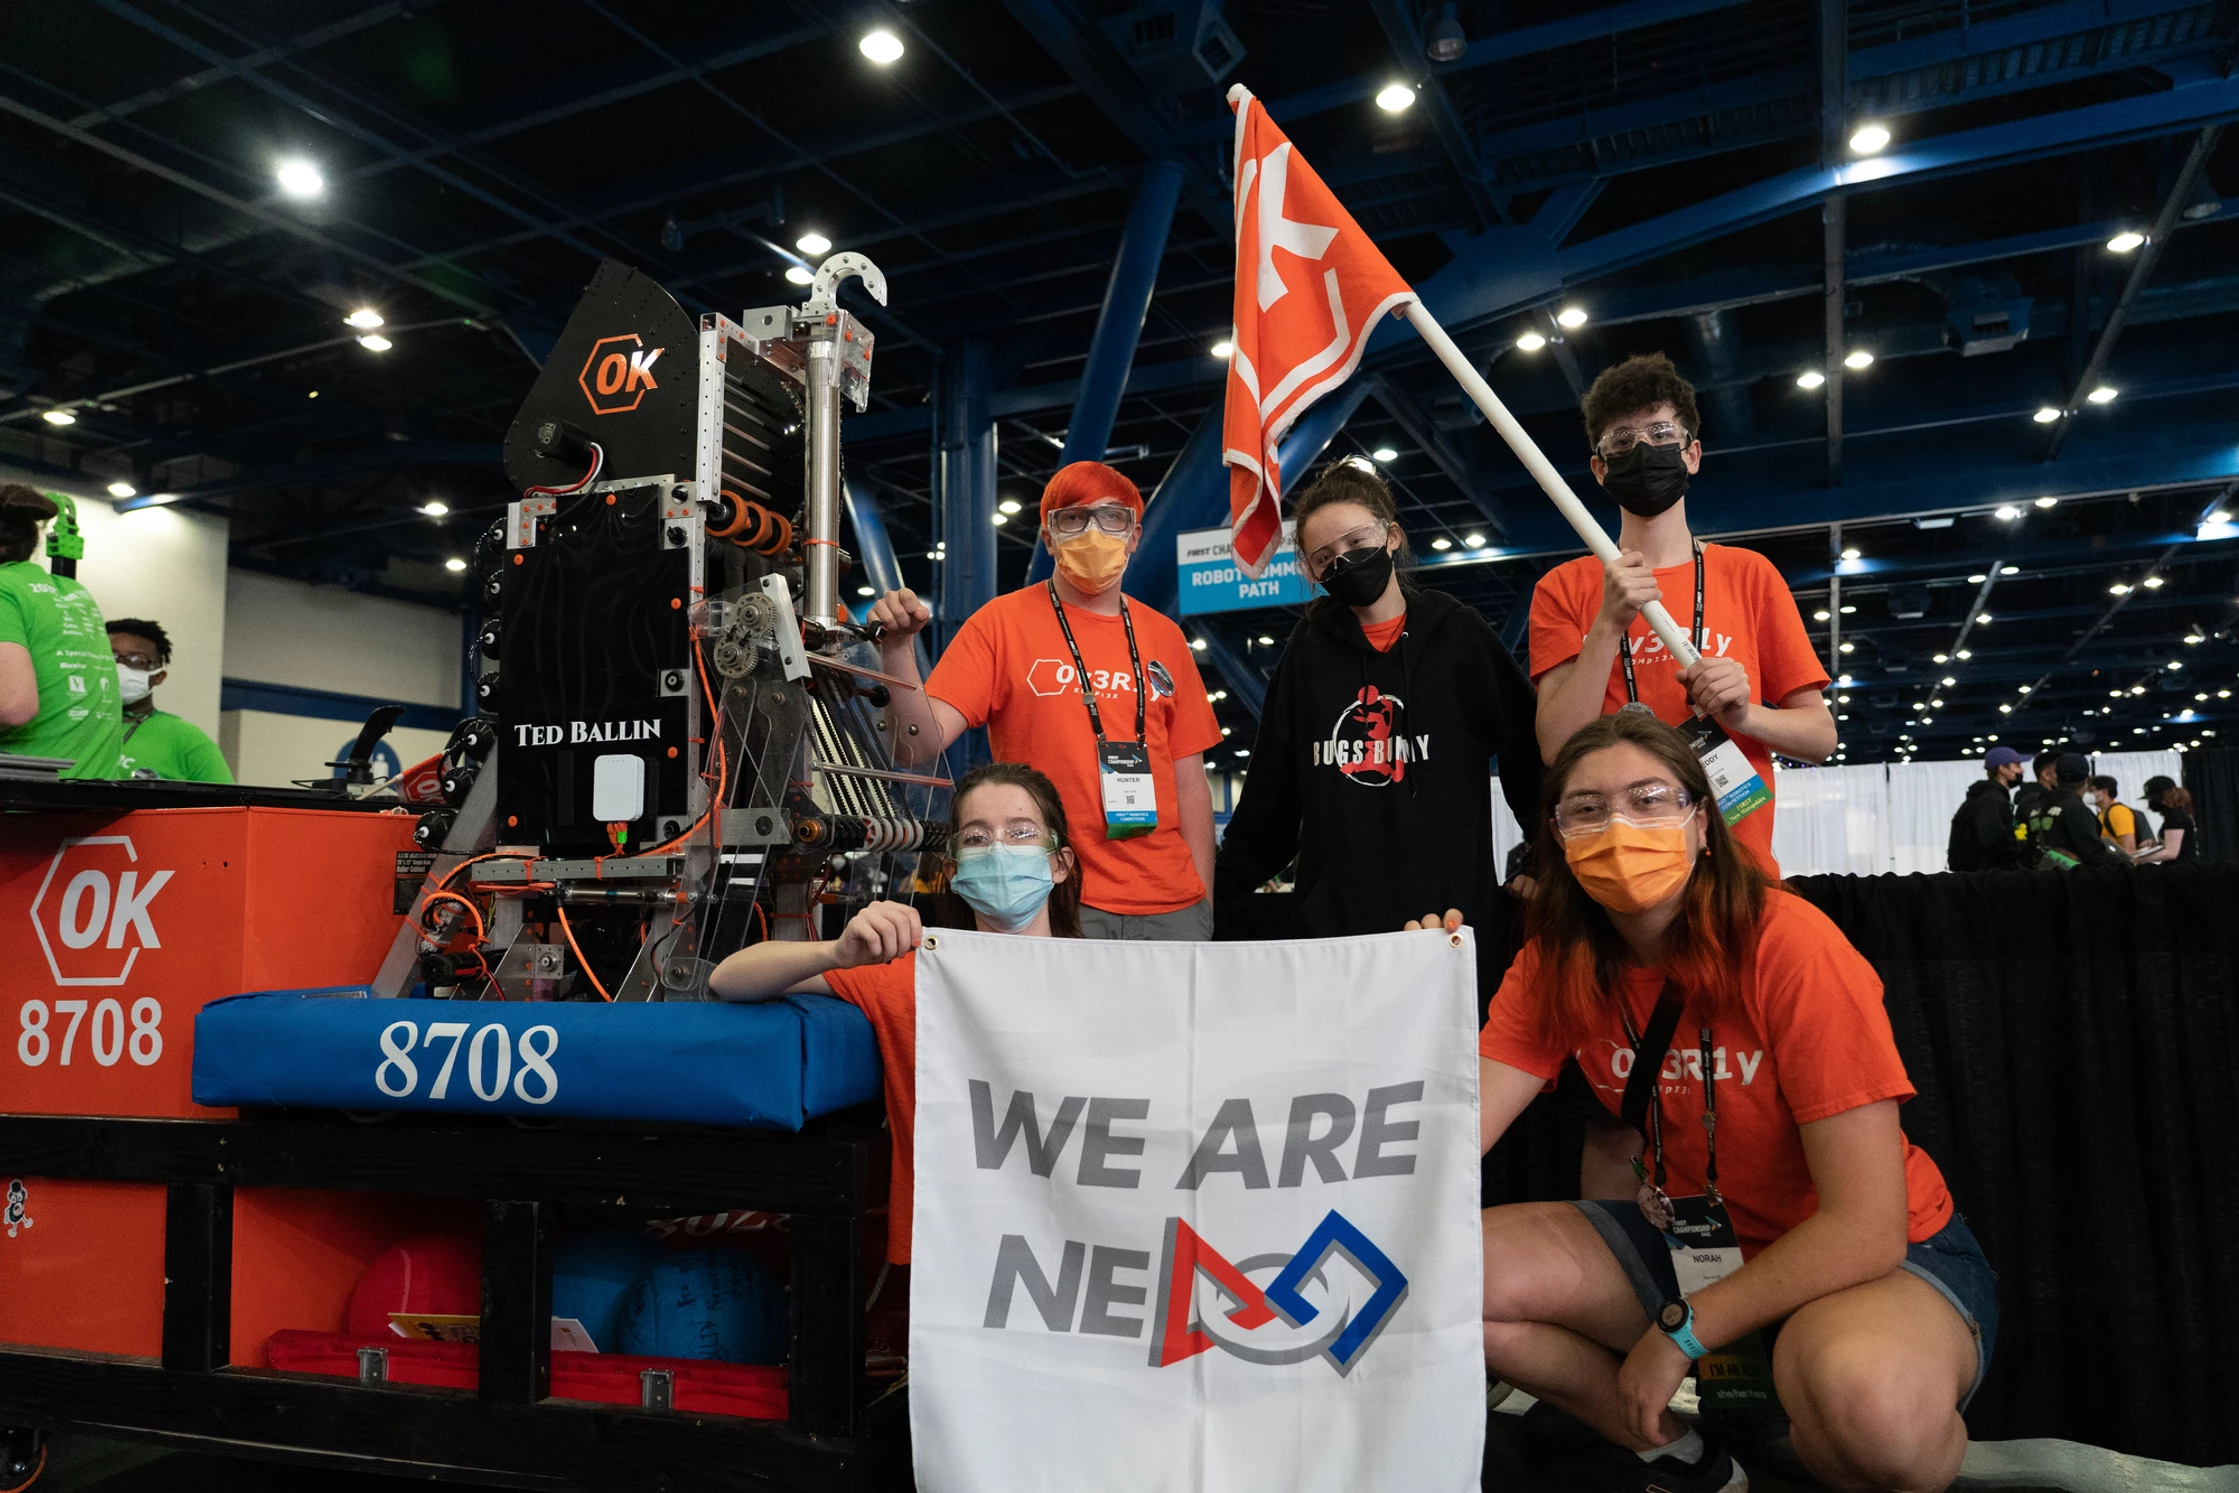 A few of us at worlds w/ robot, and we are NE first flag, with our ok flag in the background.